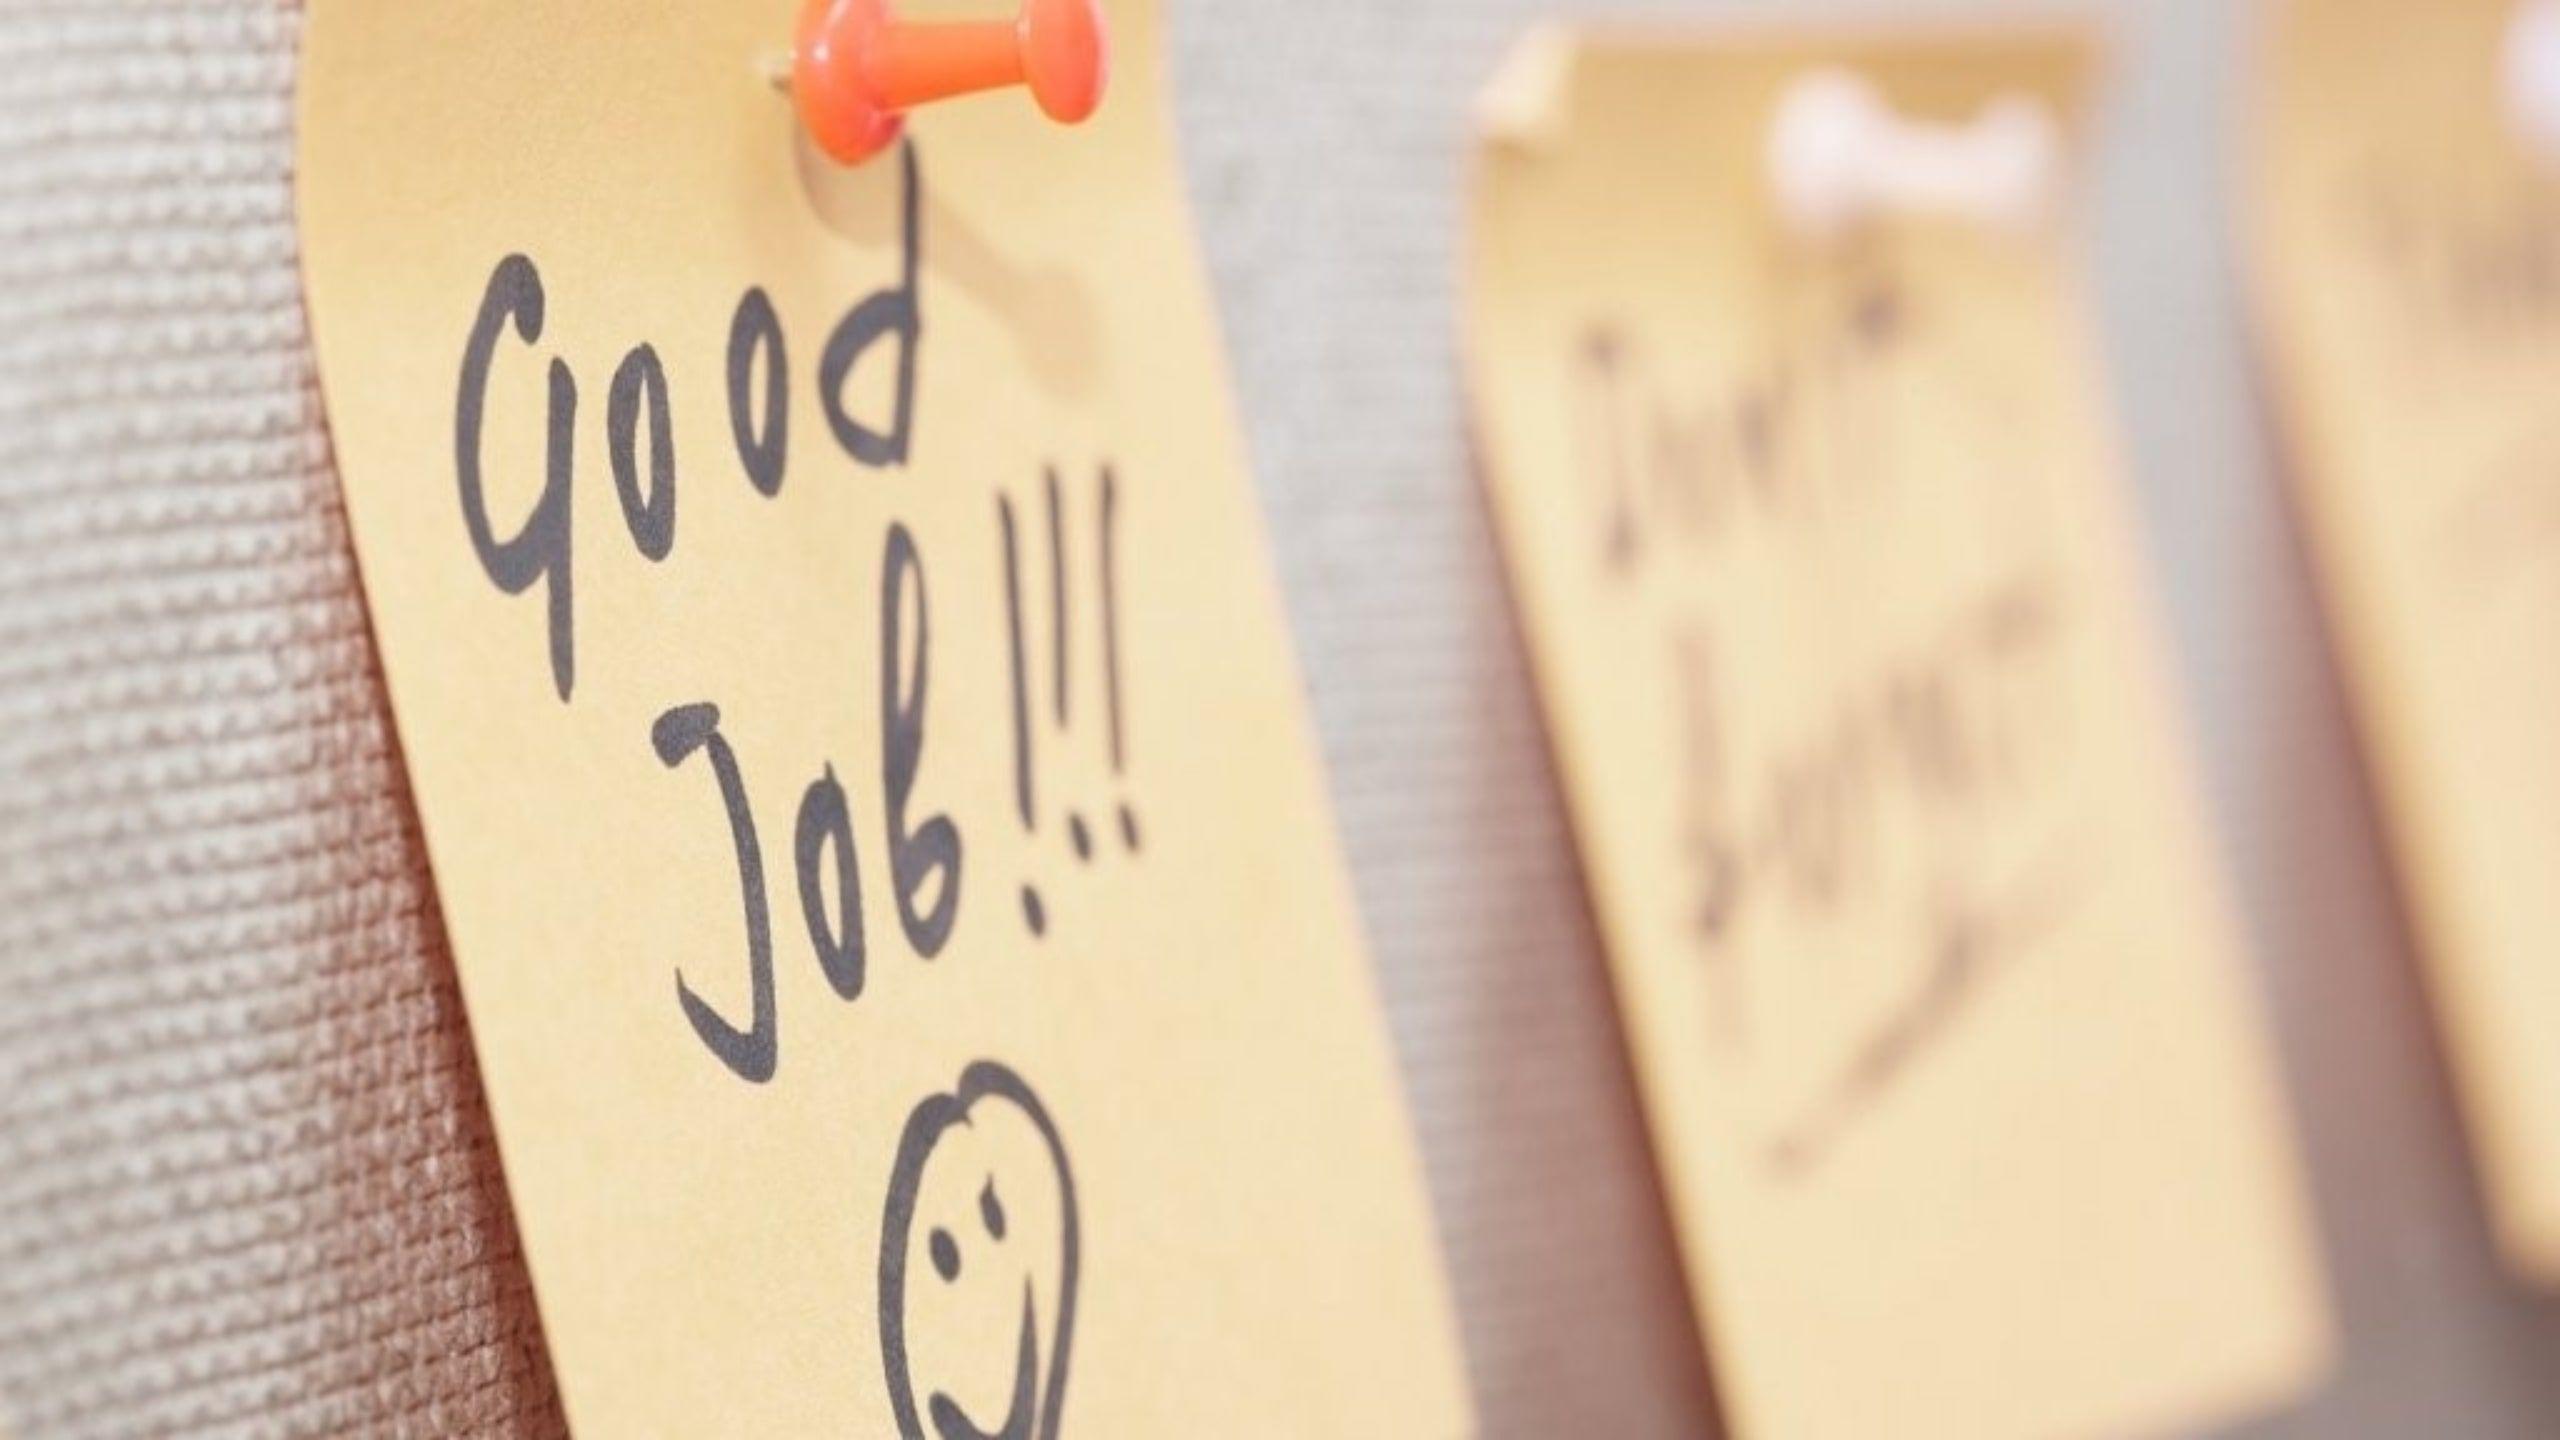 72 Most Meaningful Employee Motivation Gifts